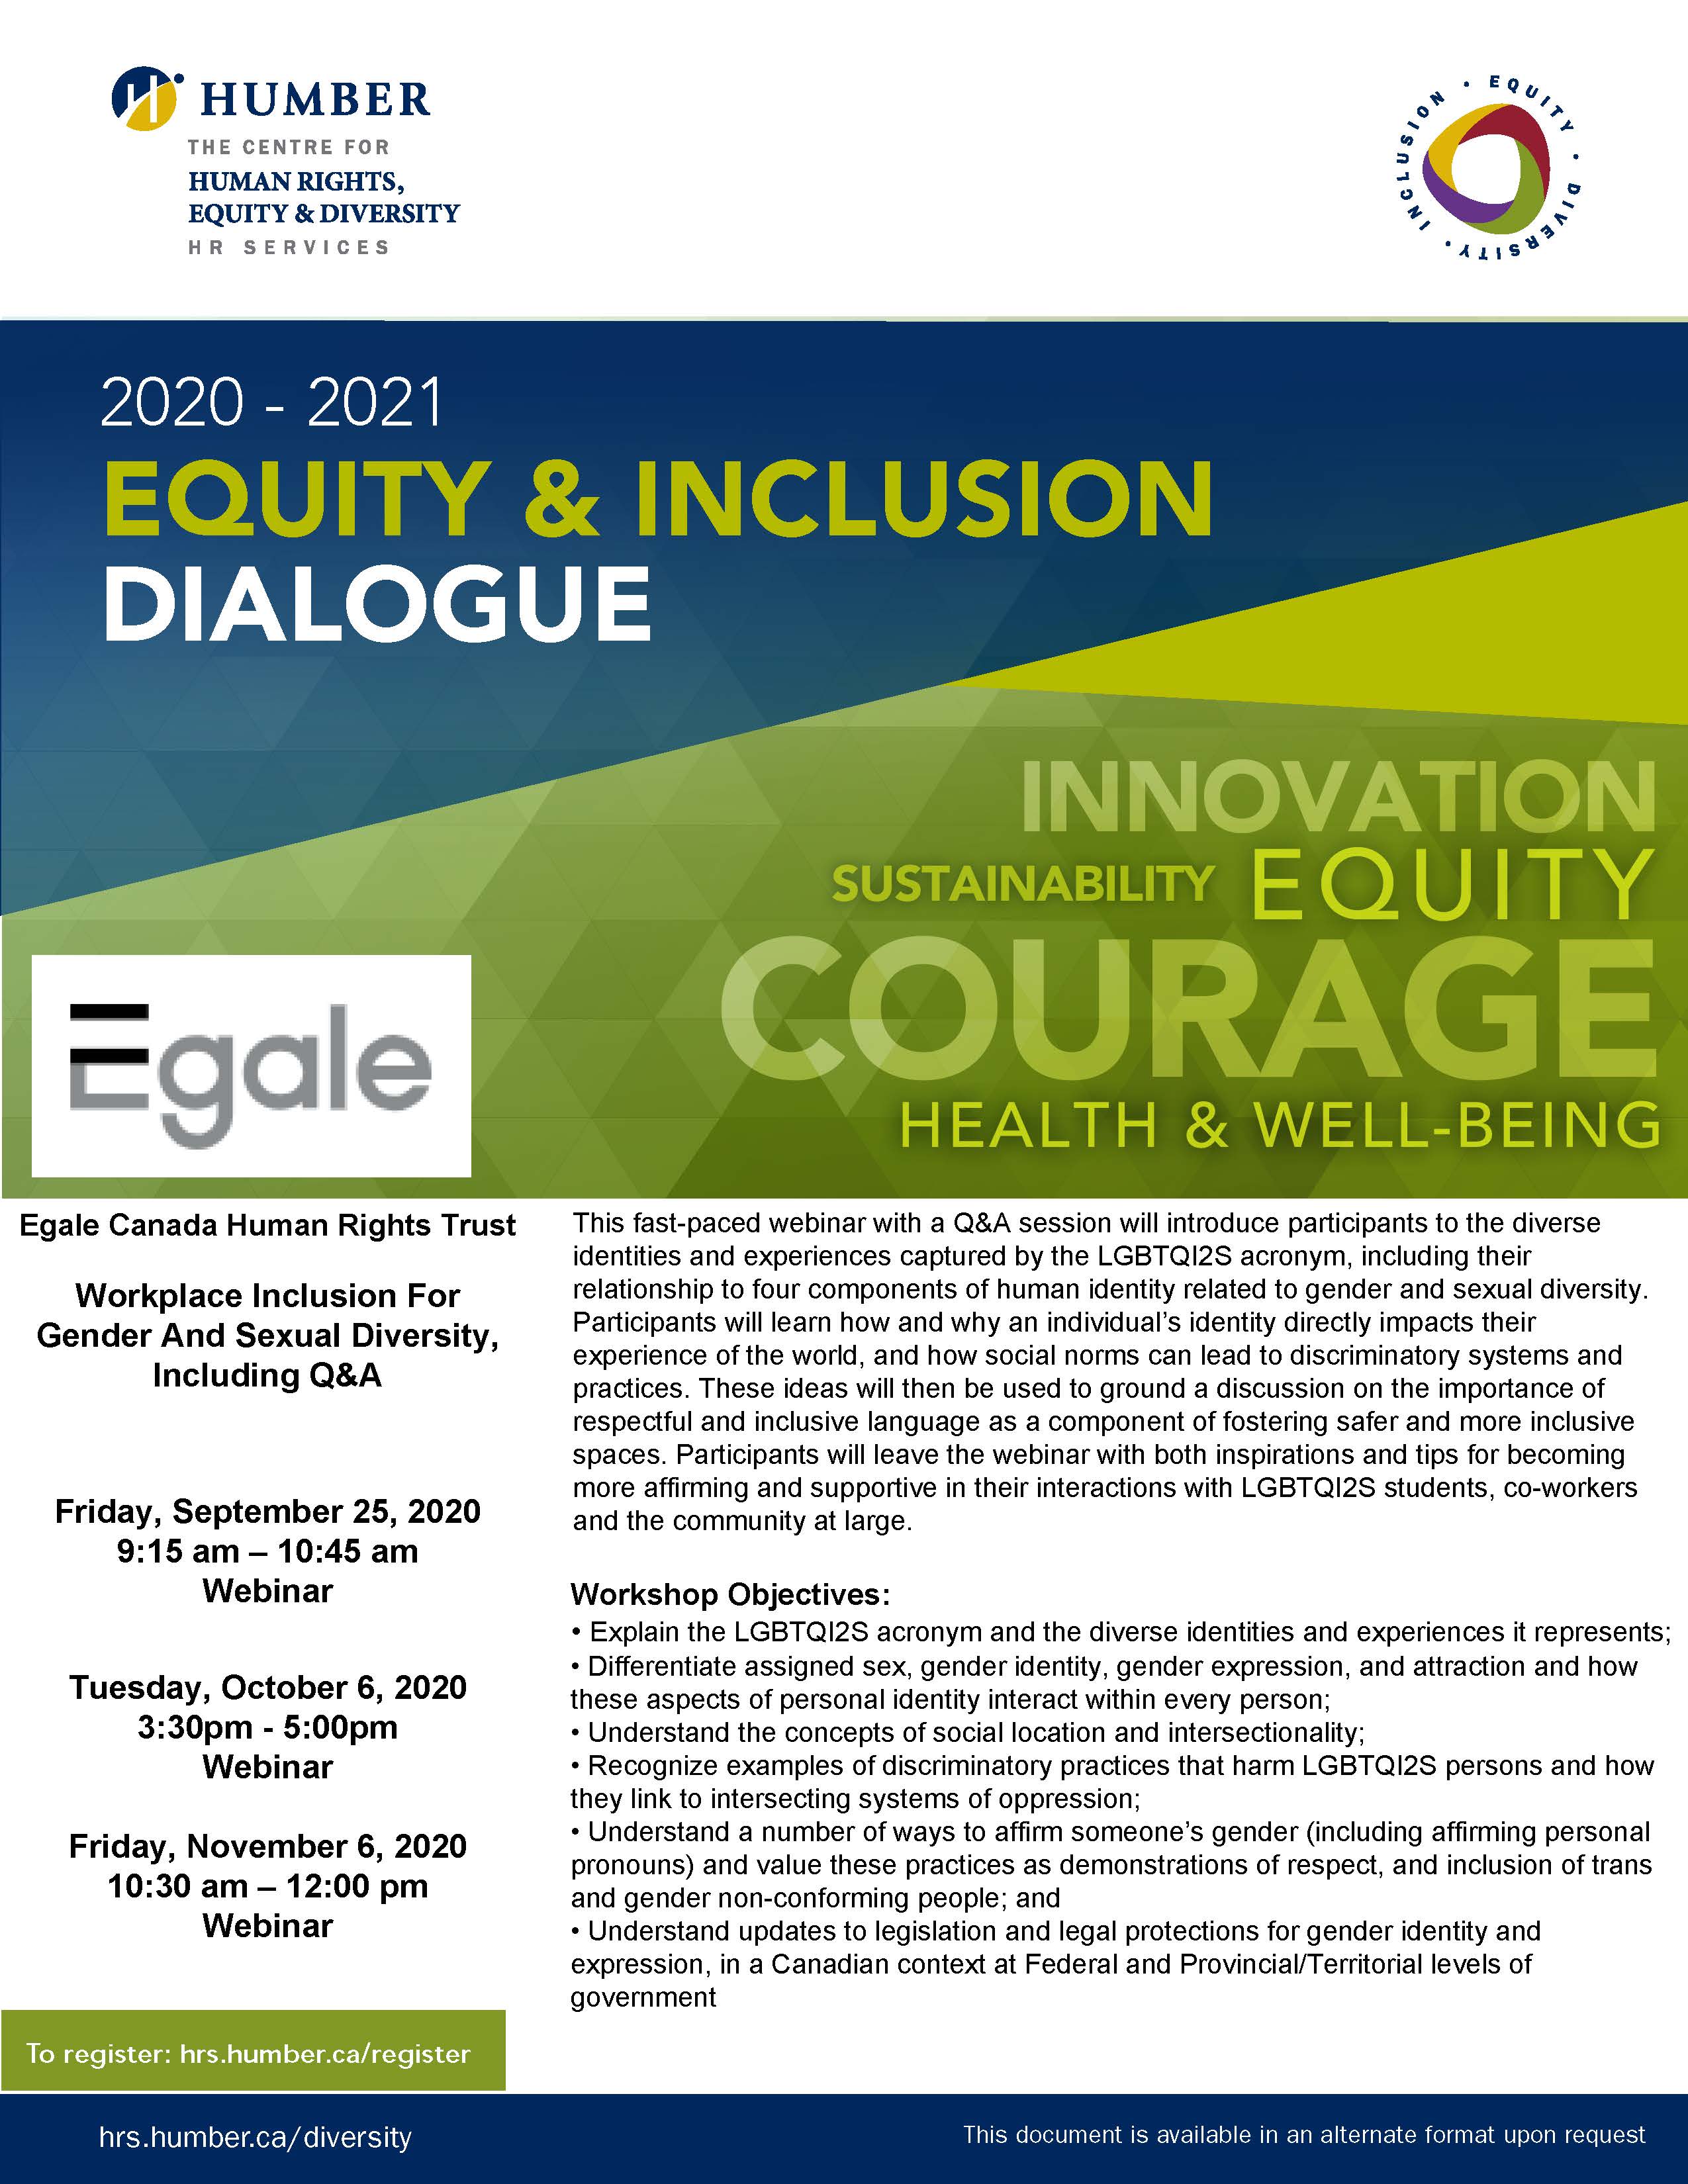 Webinar-on-Workplace-Inclusion-for-Gender-and-Sexual-Diversity